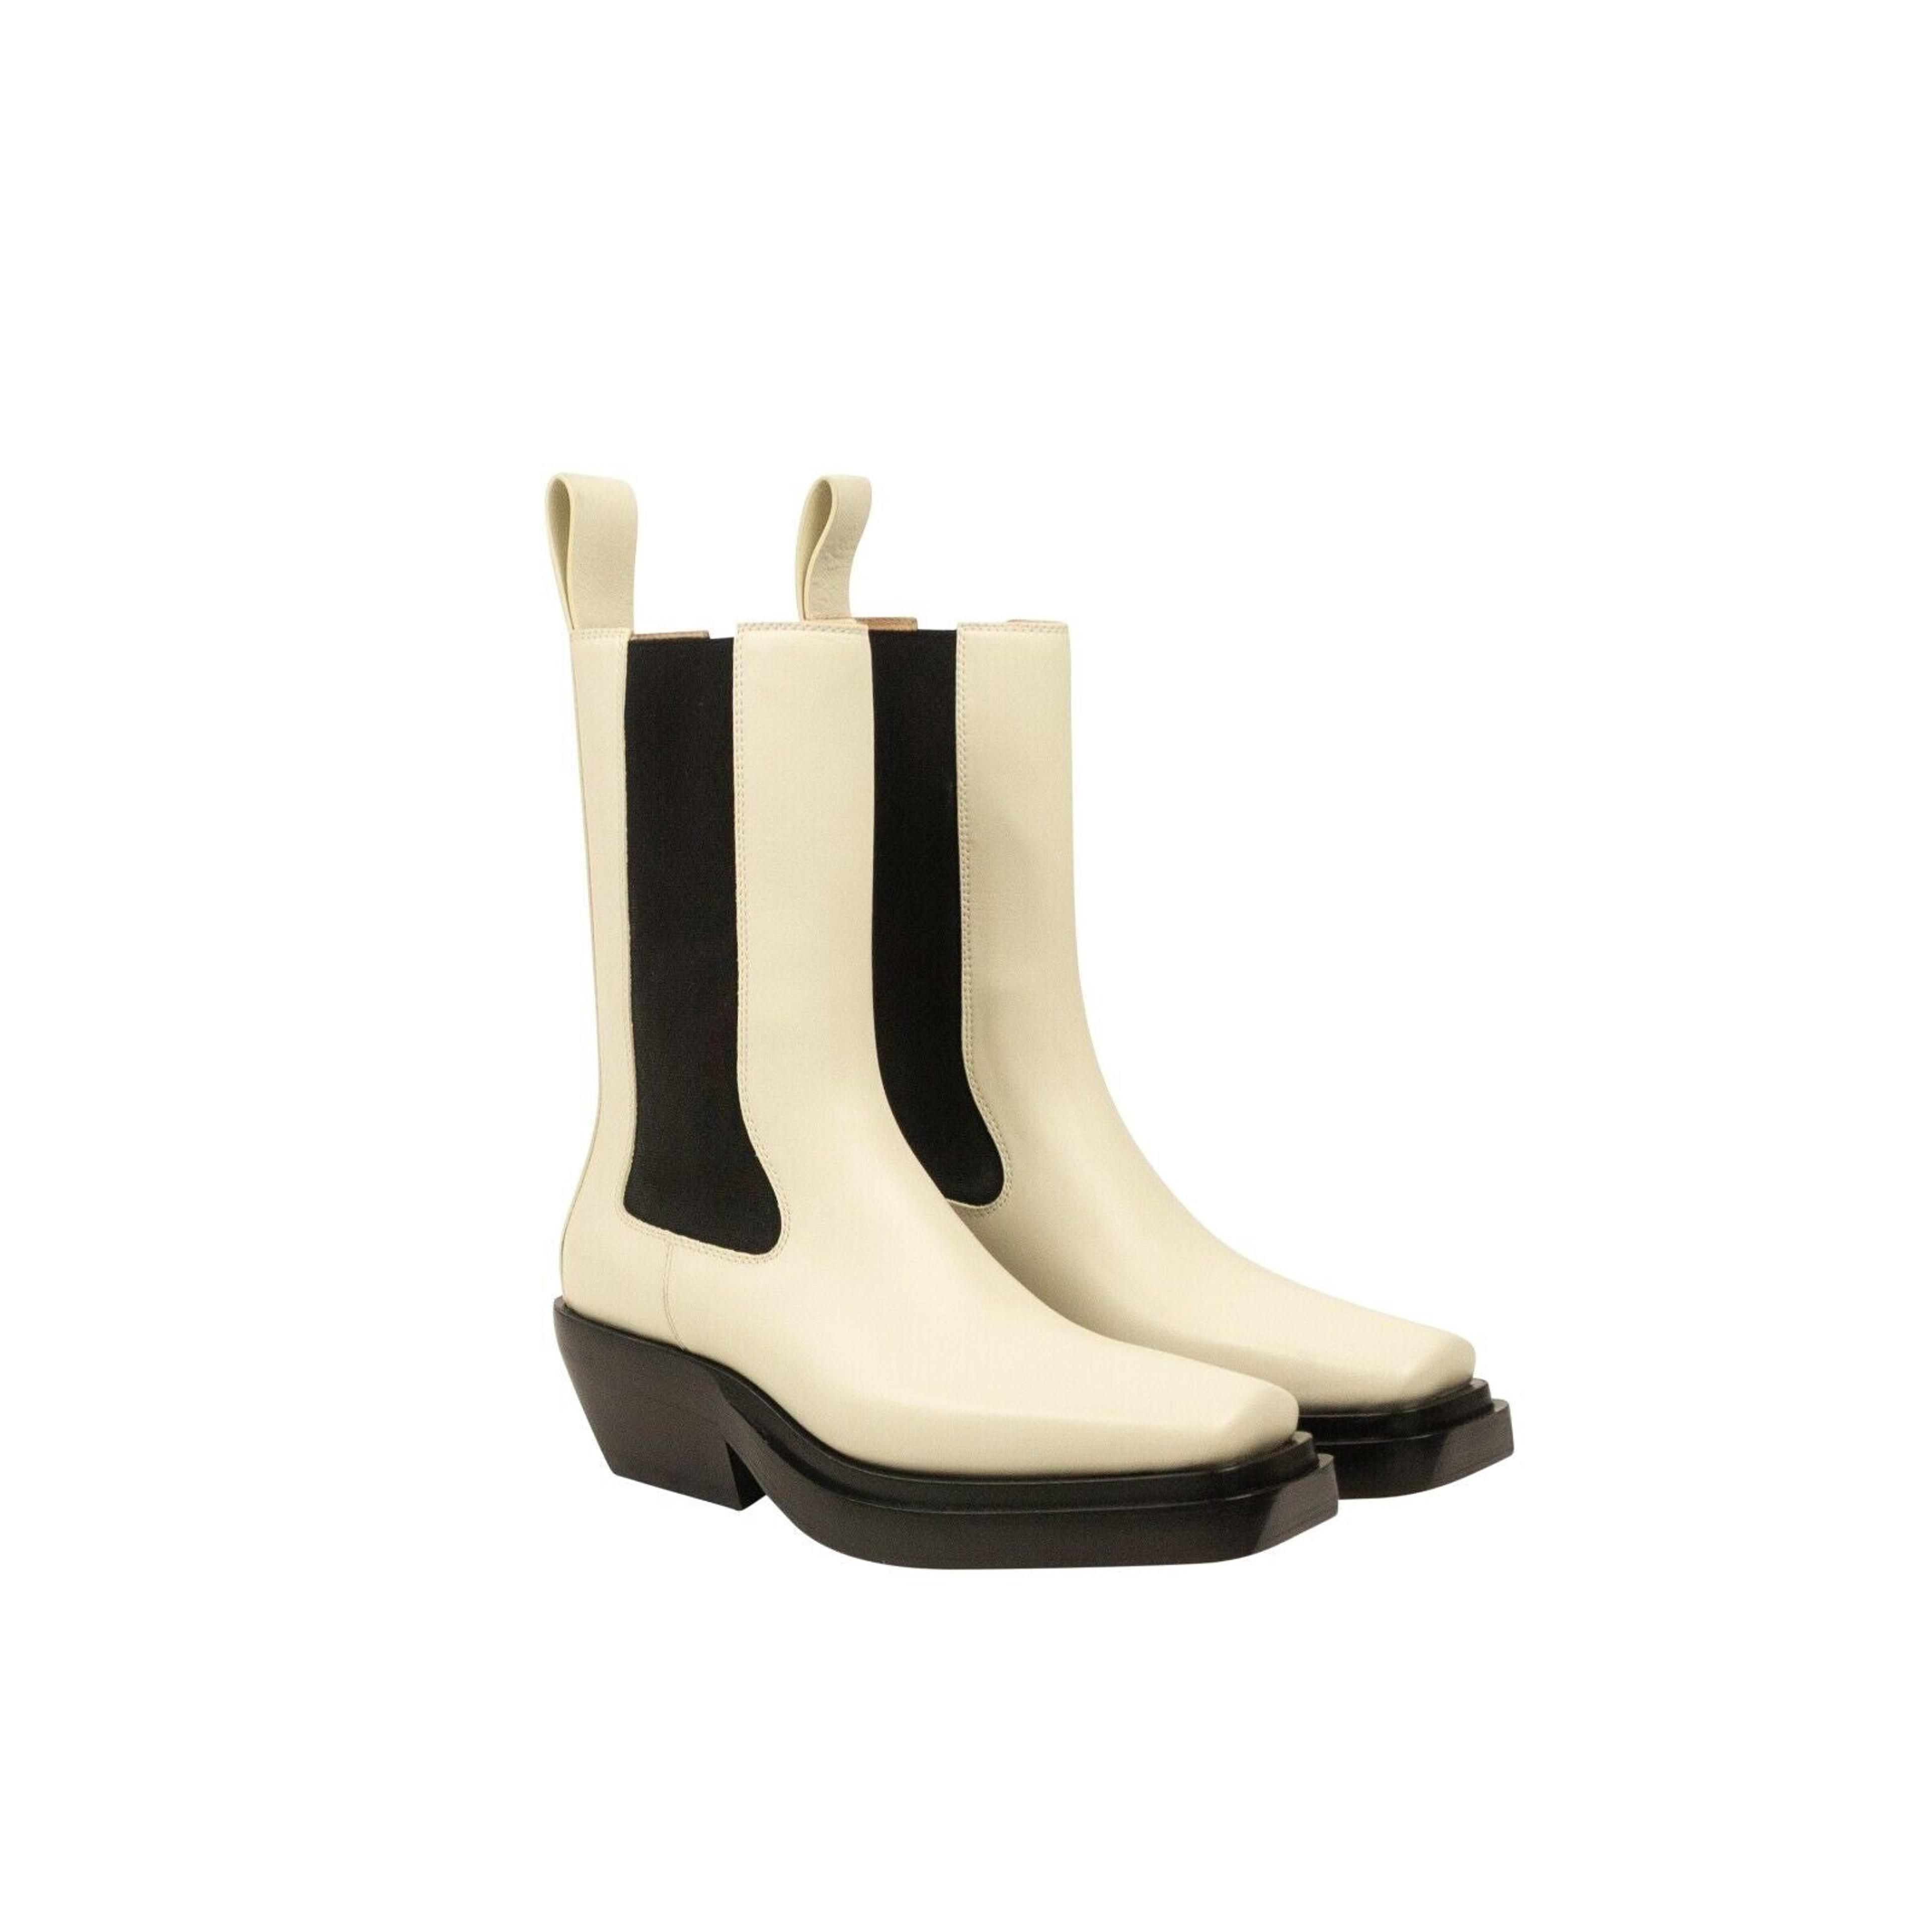 Alternate View 2 of Ivory Lean Heeled Chelsea Boots